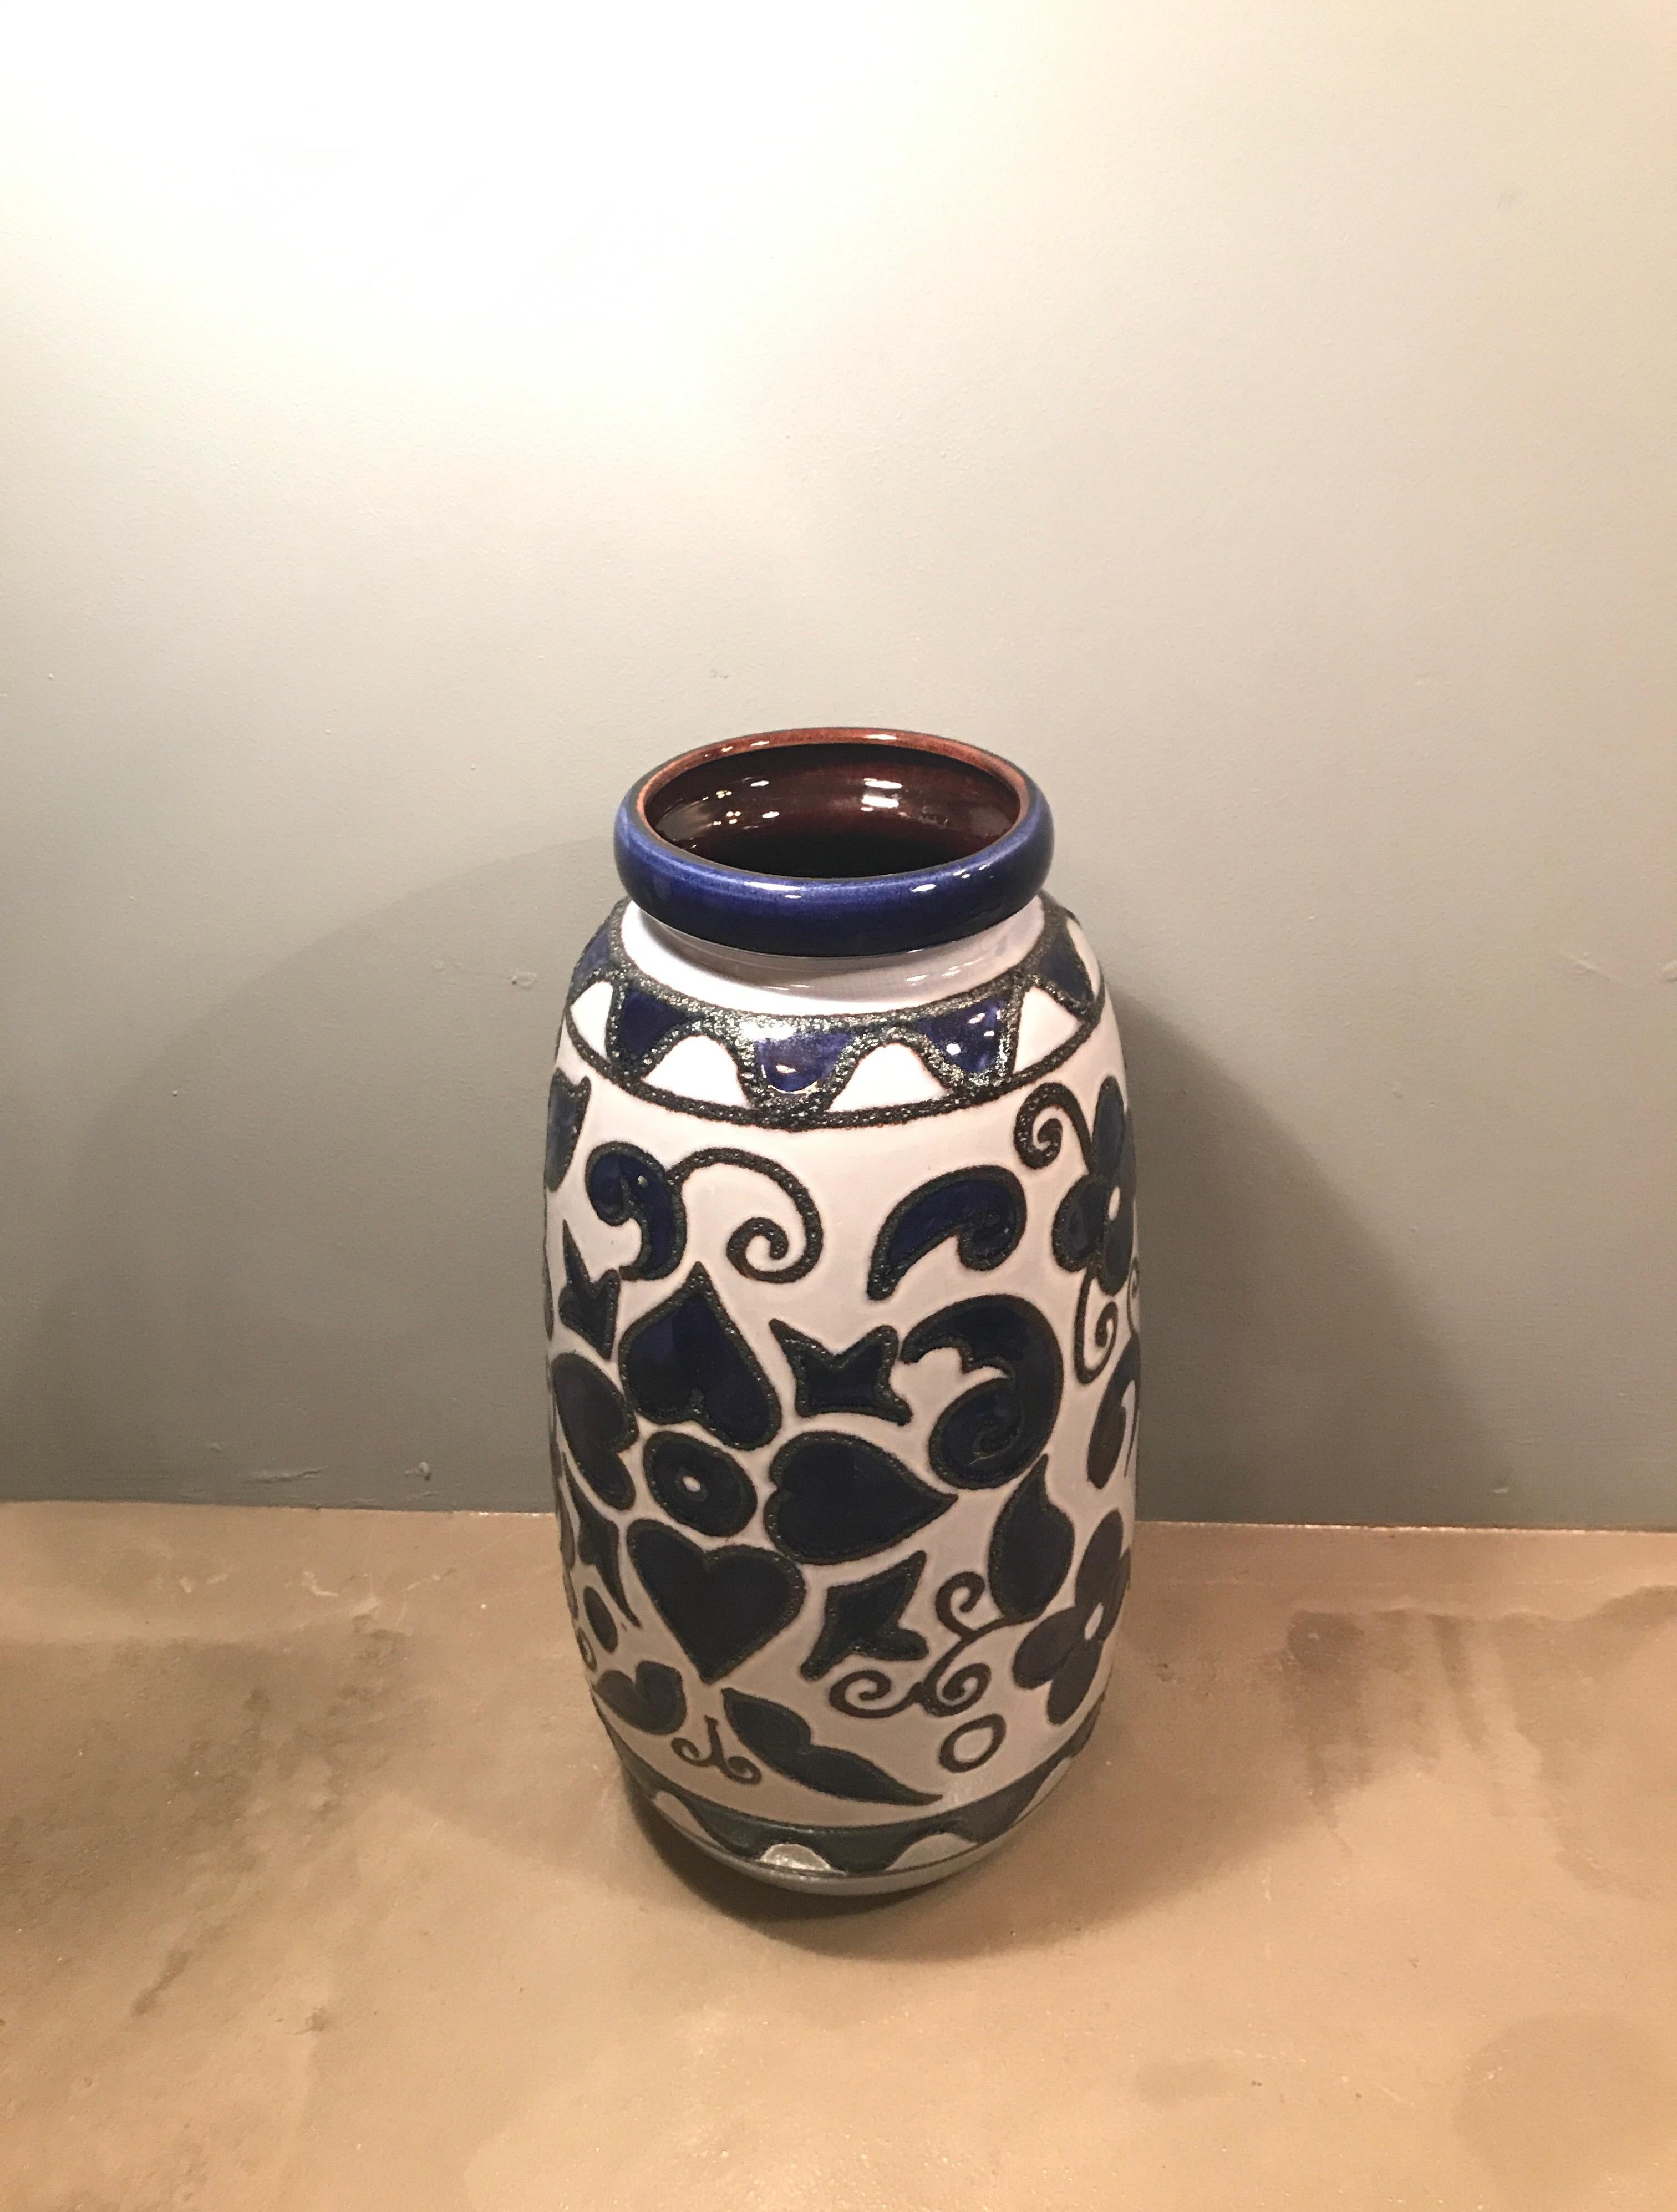 Beautiful large ceramic art vase from the 1970s and made in West Germany
Lovely floral designs and no chips or cracks.